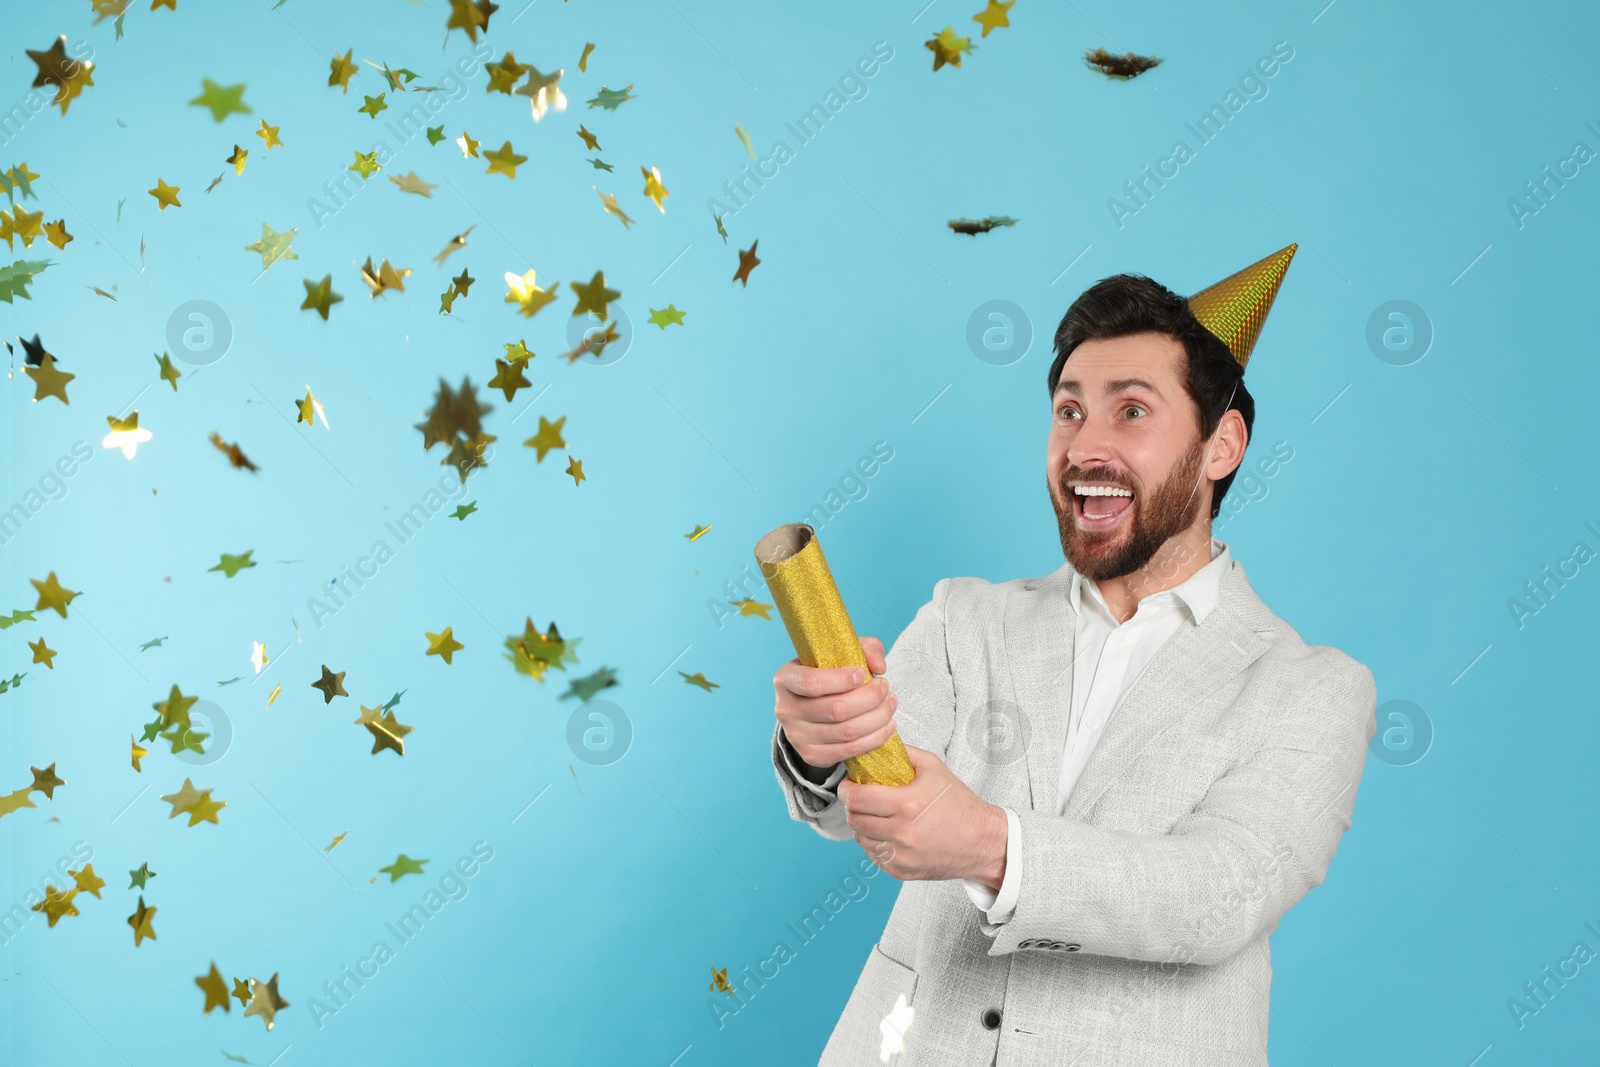 Photo of Emotional man blowing up party popper on light blue background